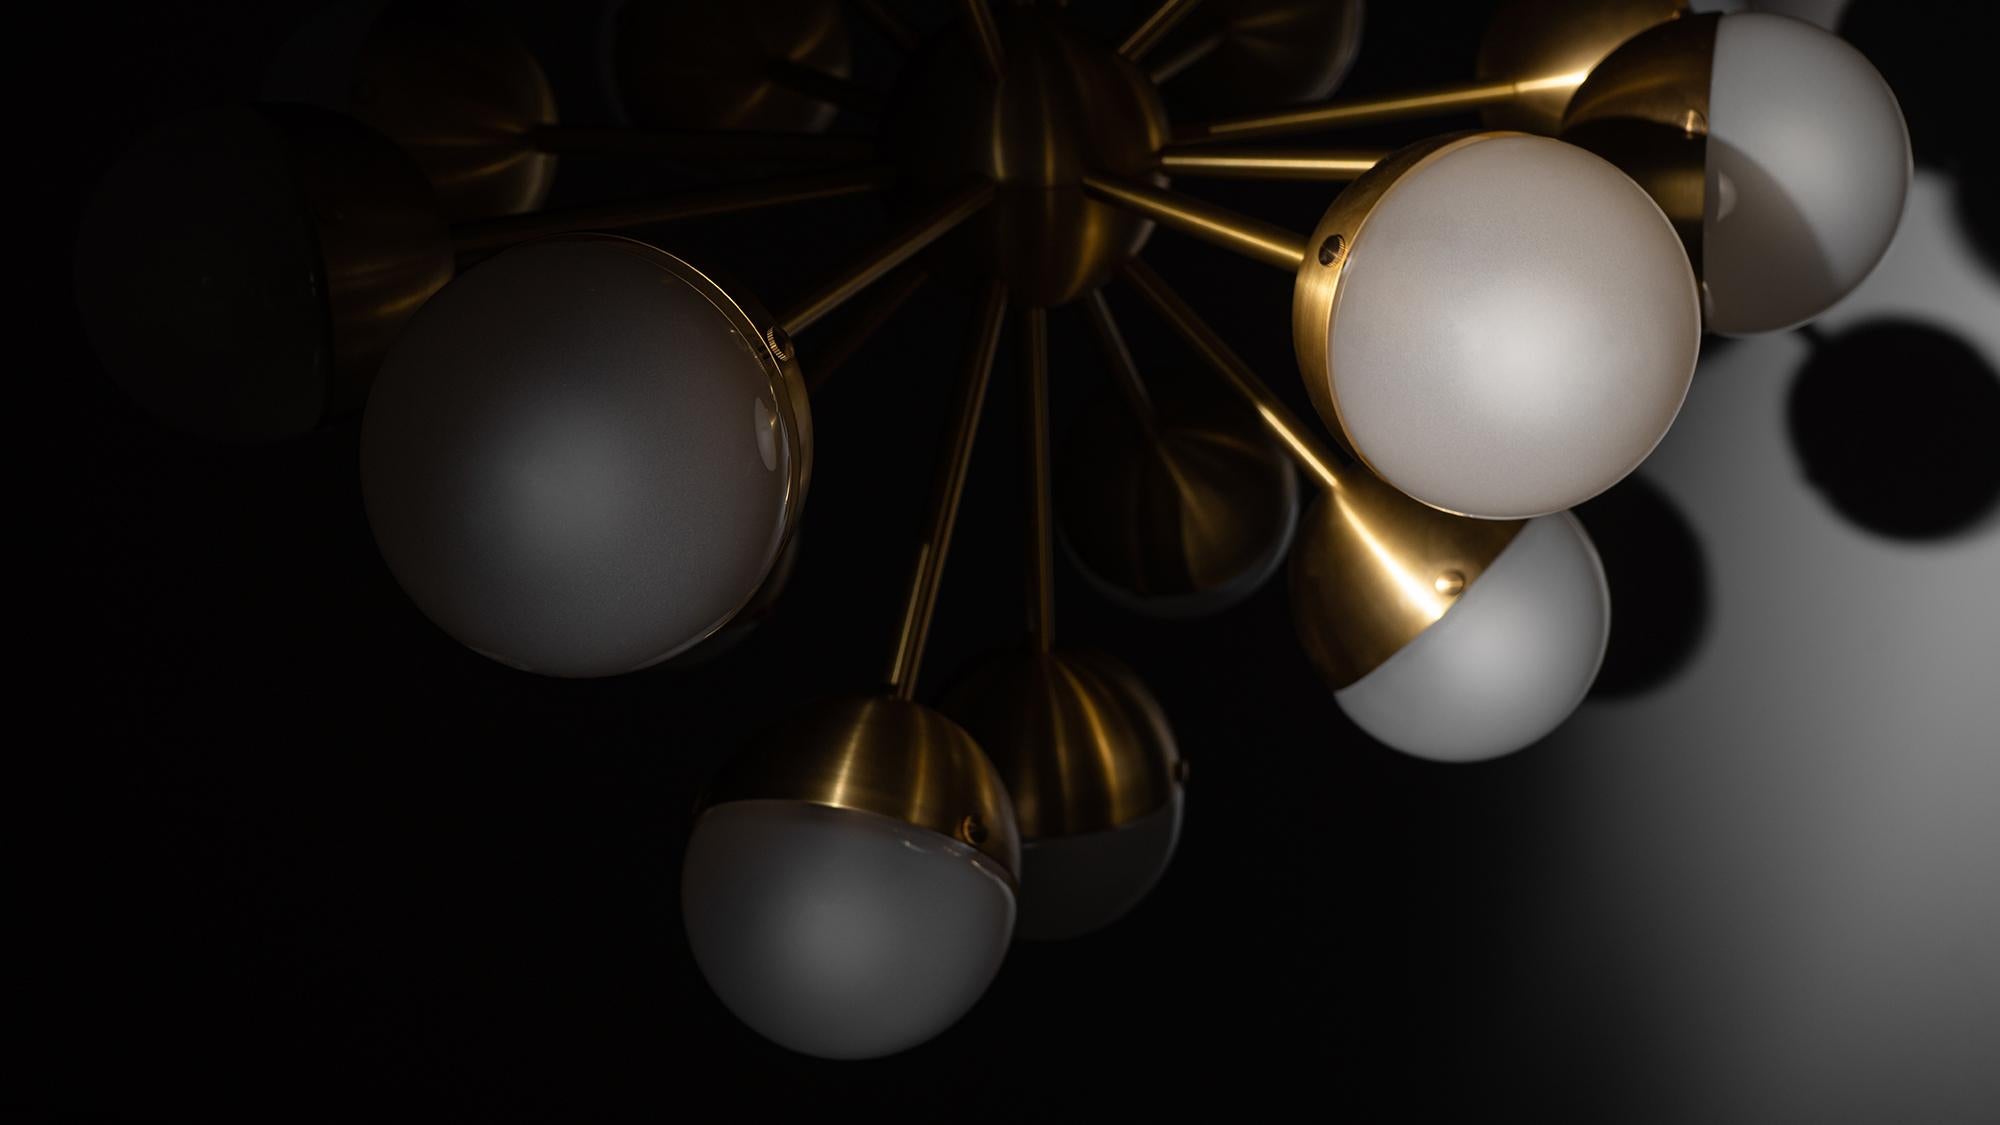 Sparks of light trail brass lines in a circular formation. Radiating out from a spherical nucleus, seventeen sprightly rods wield illuminated hemispheres, spectacular spatial punctuation.

Available in our three signature finishes: Lacquered